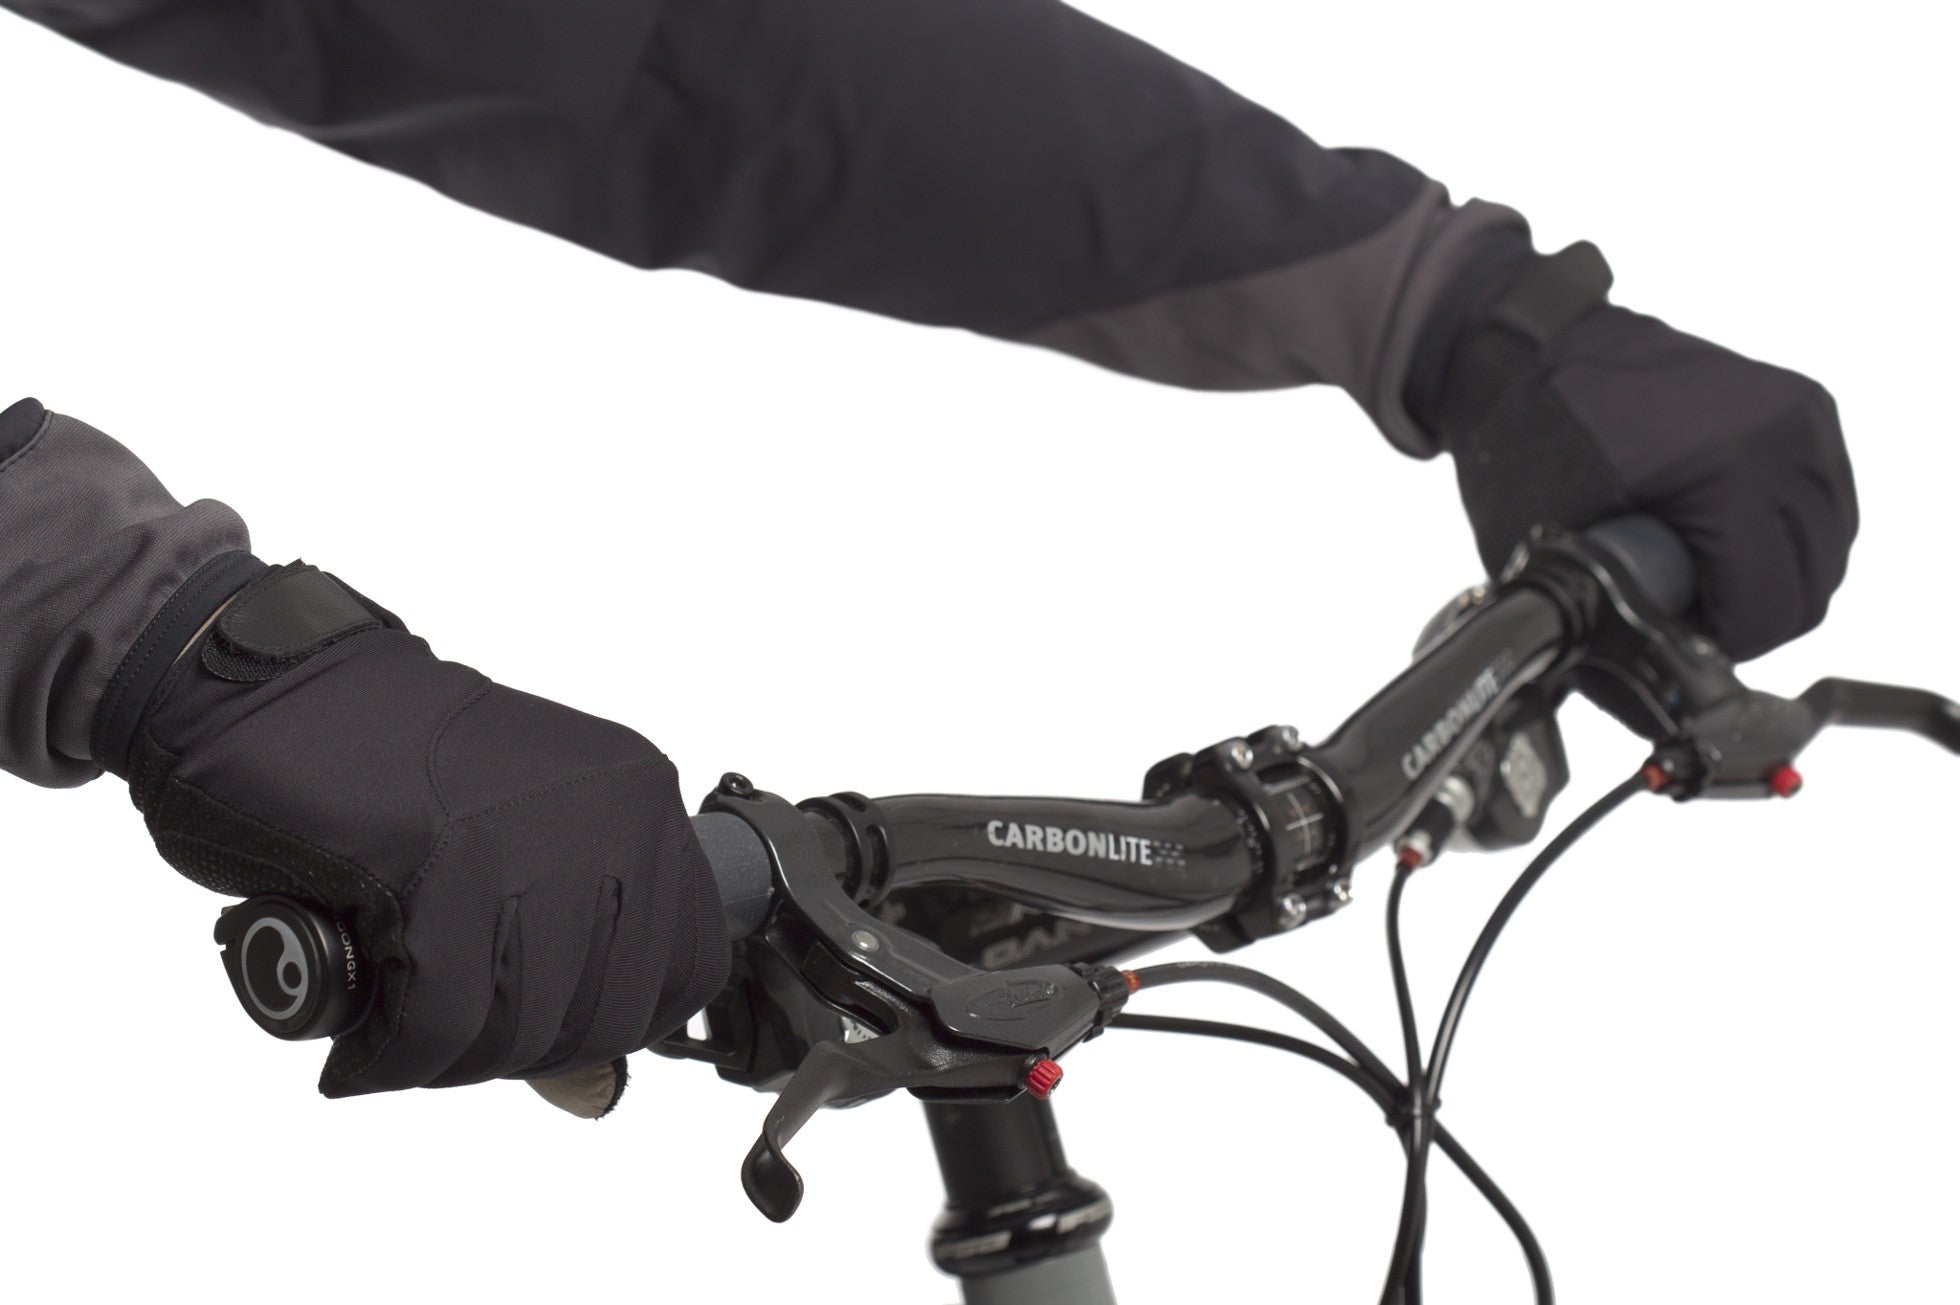 BioLogic Cipher Cycling Gloves